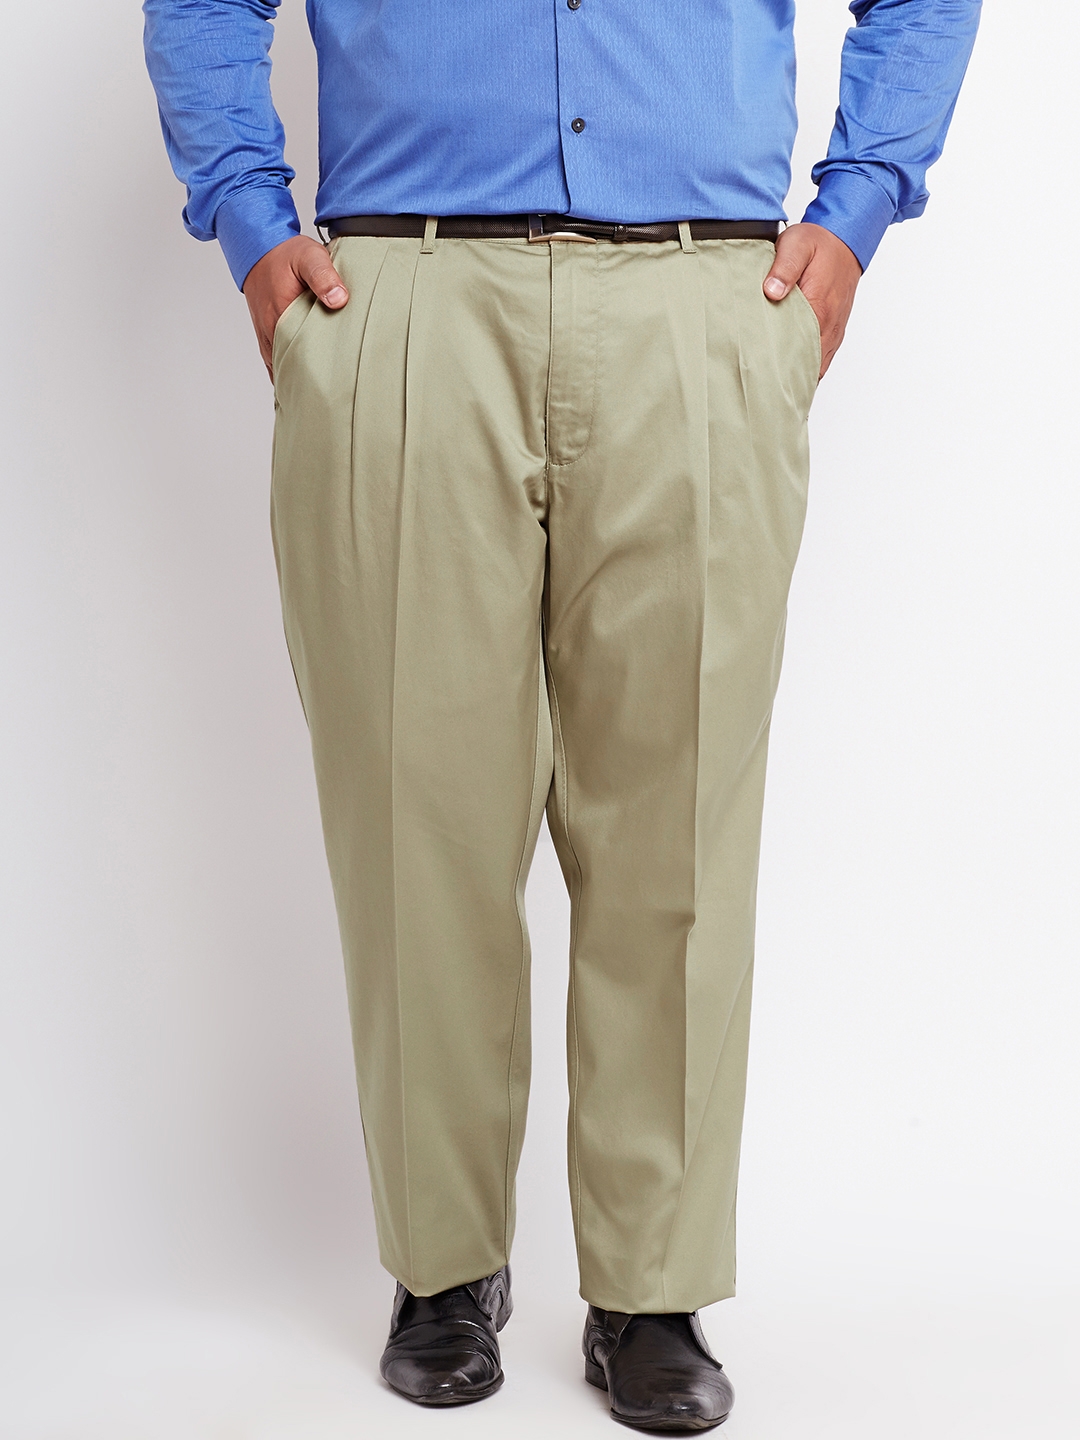 Buy Colorplus Navy Regular Fit Trousers for Mens Online @ Tata CLiQ-totobed.com.vn